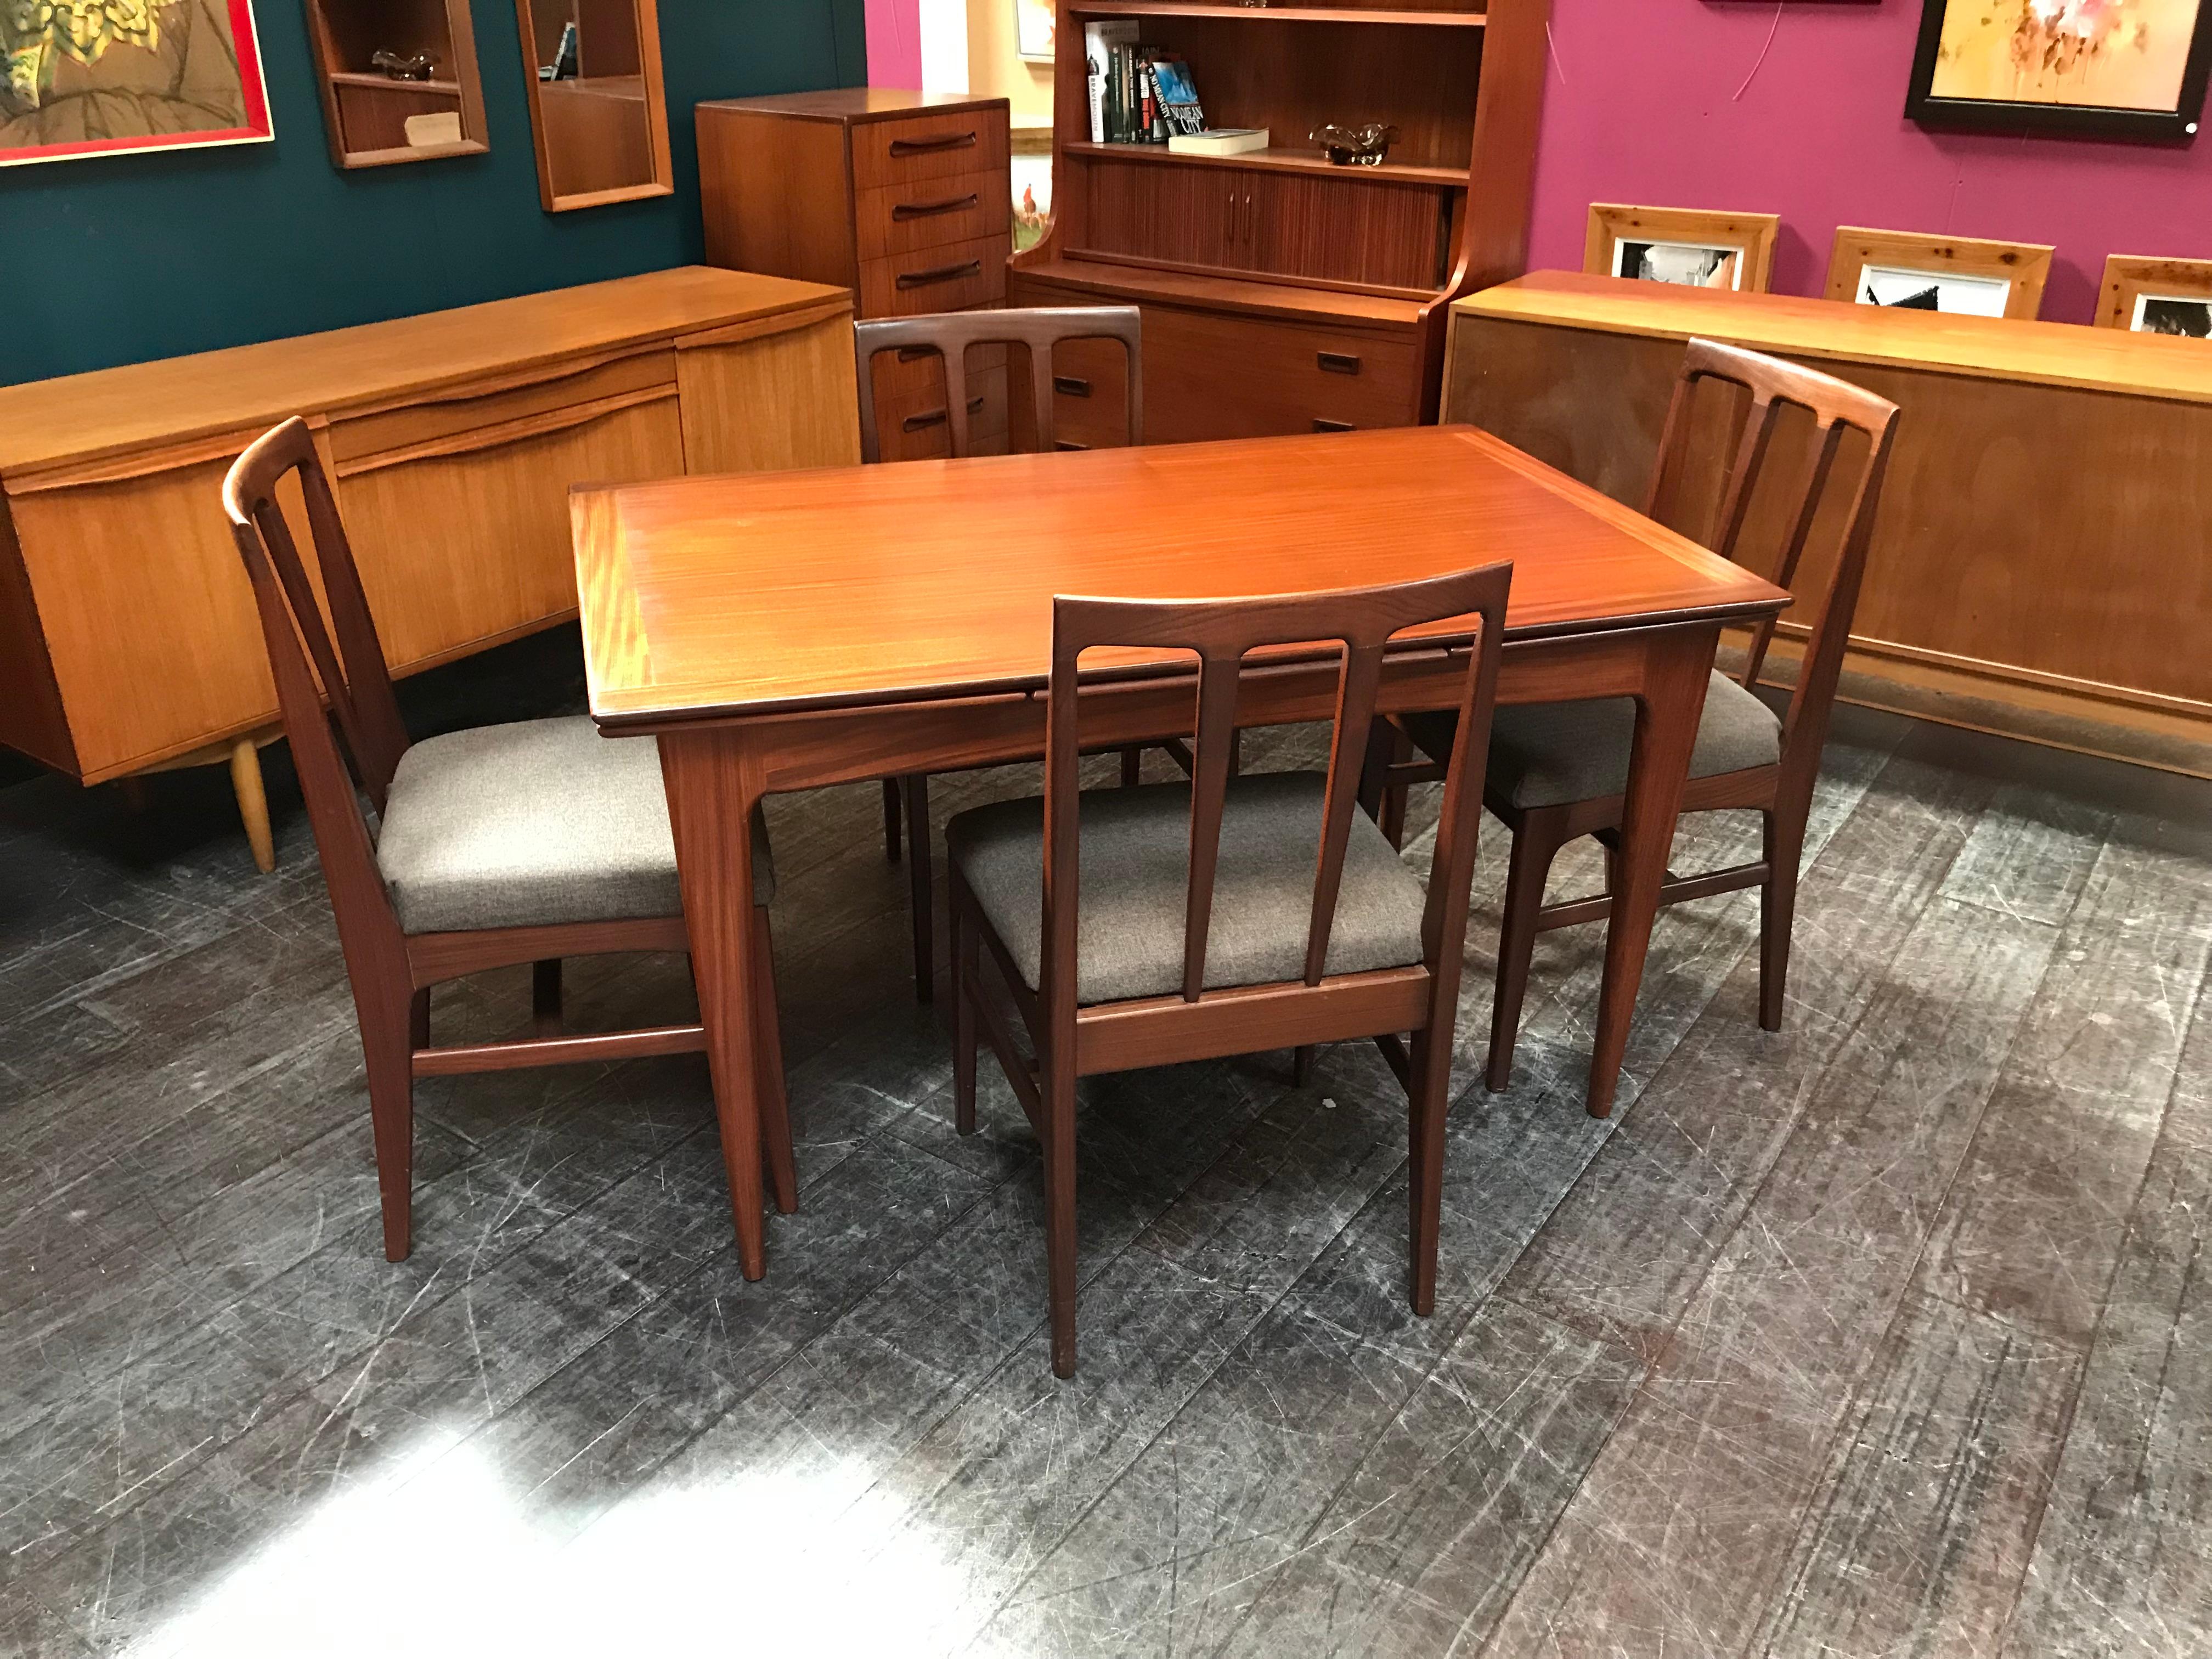 Mid-Century Modern Extending Midcentury Afrormosia Dining Table with 4 Chairs by Younger of Glasgow For Sale